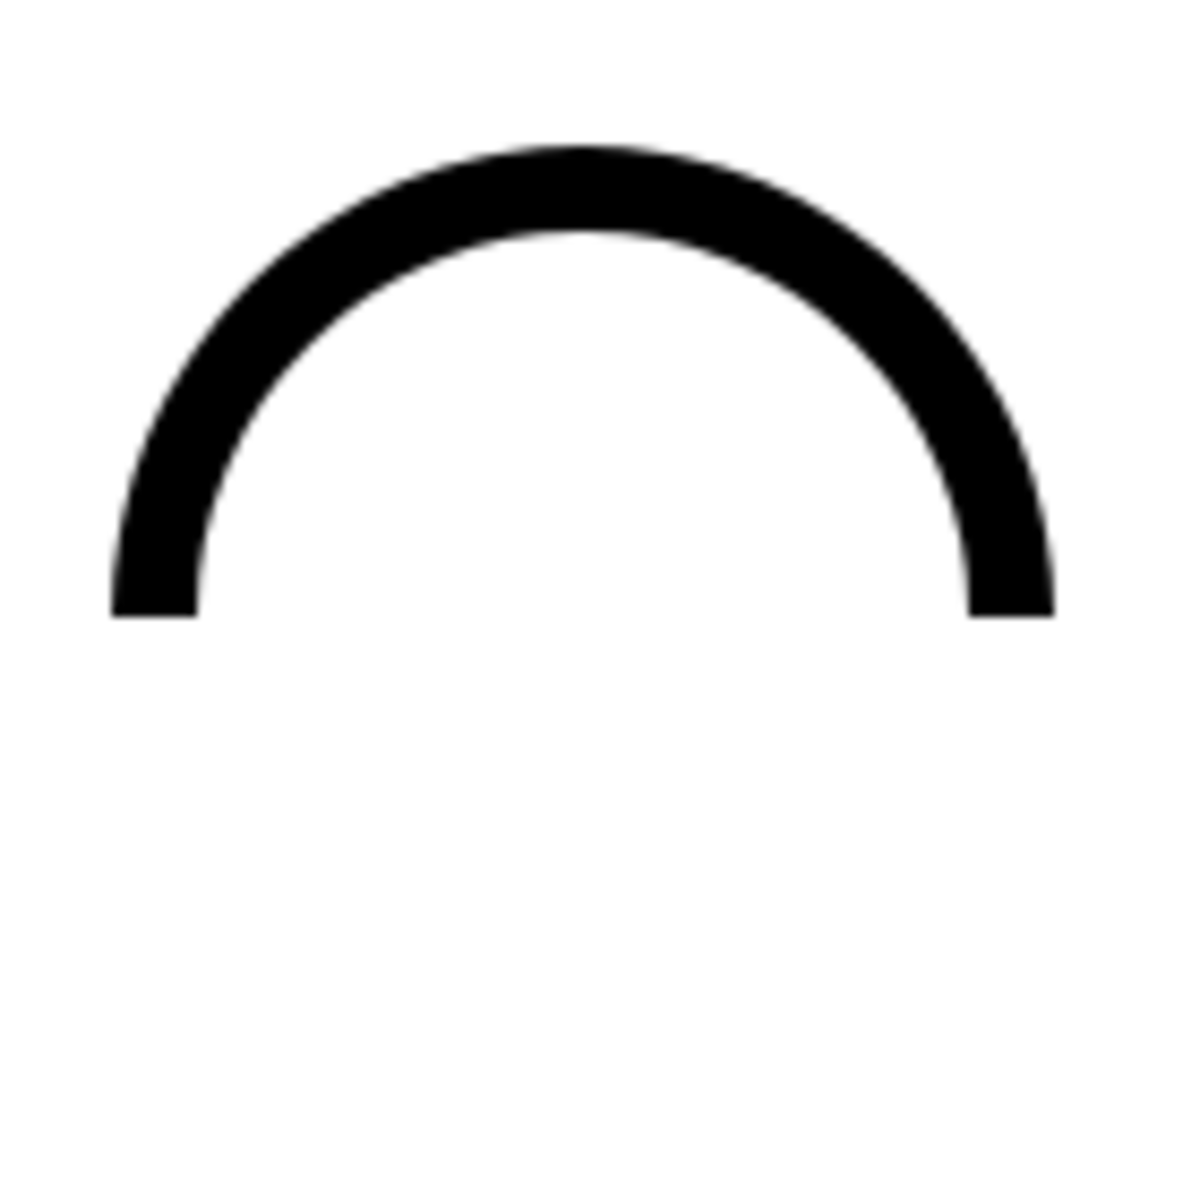 A clockwise arc starting from the 9 o'clock position (Math.PI) to the 3 o'clock position (2 * Math.PI). This is an arc of 180 degrees and the top half of a circle. 